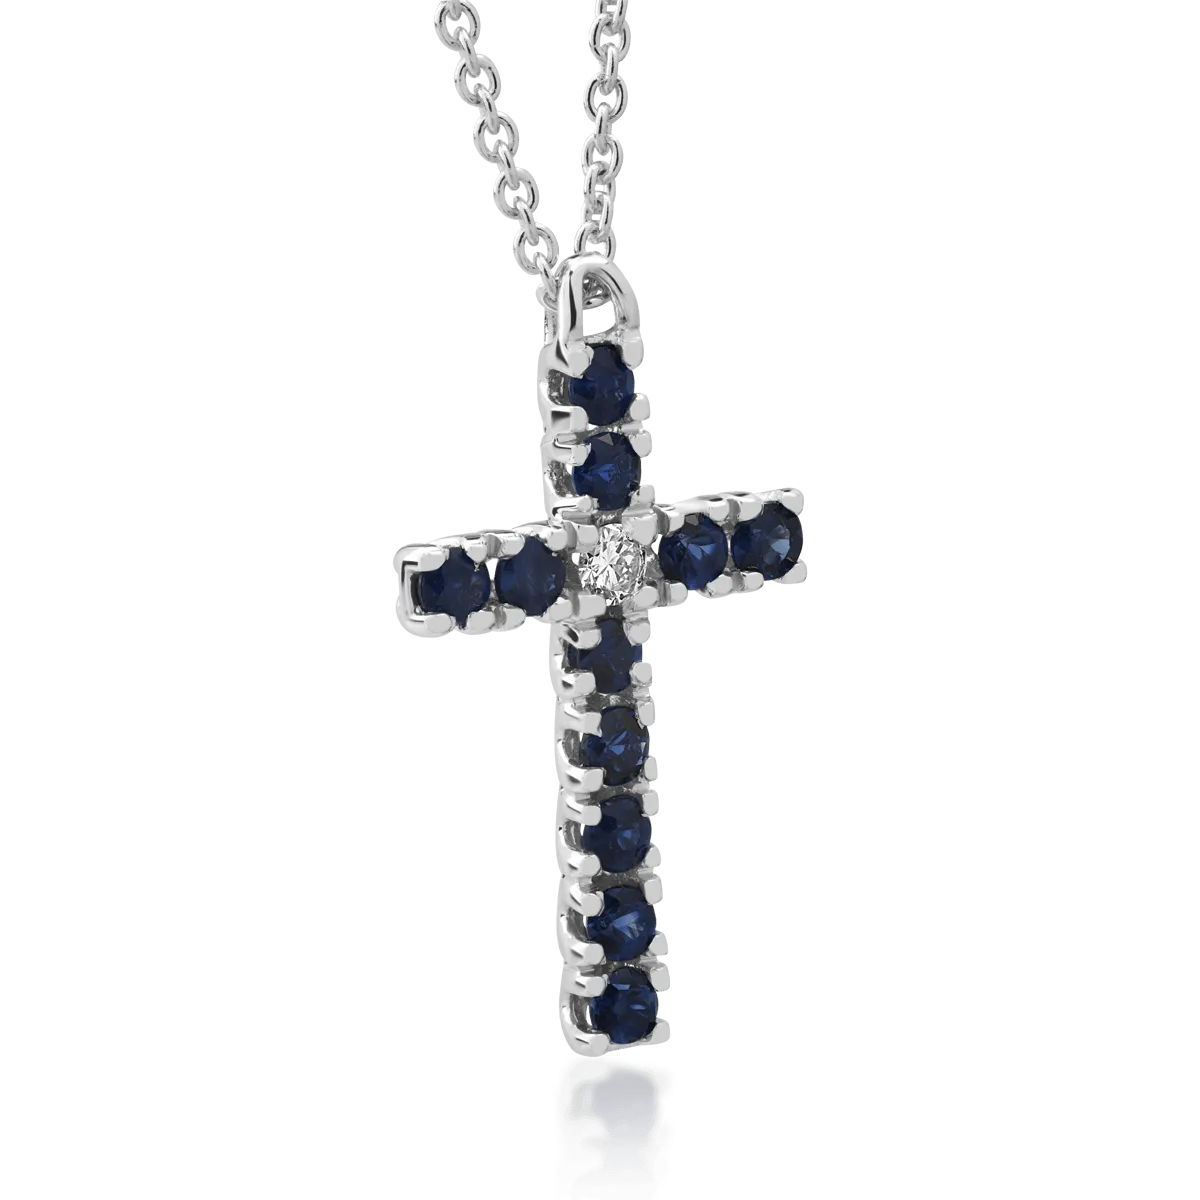 18K white gold cross pendant necklace with 0.42ct sapphires and a 0.04ct diamond